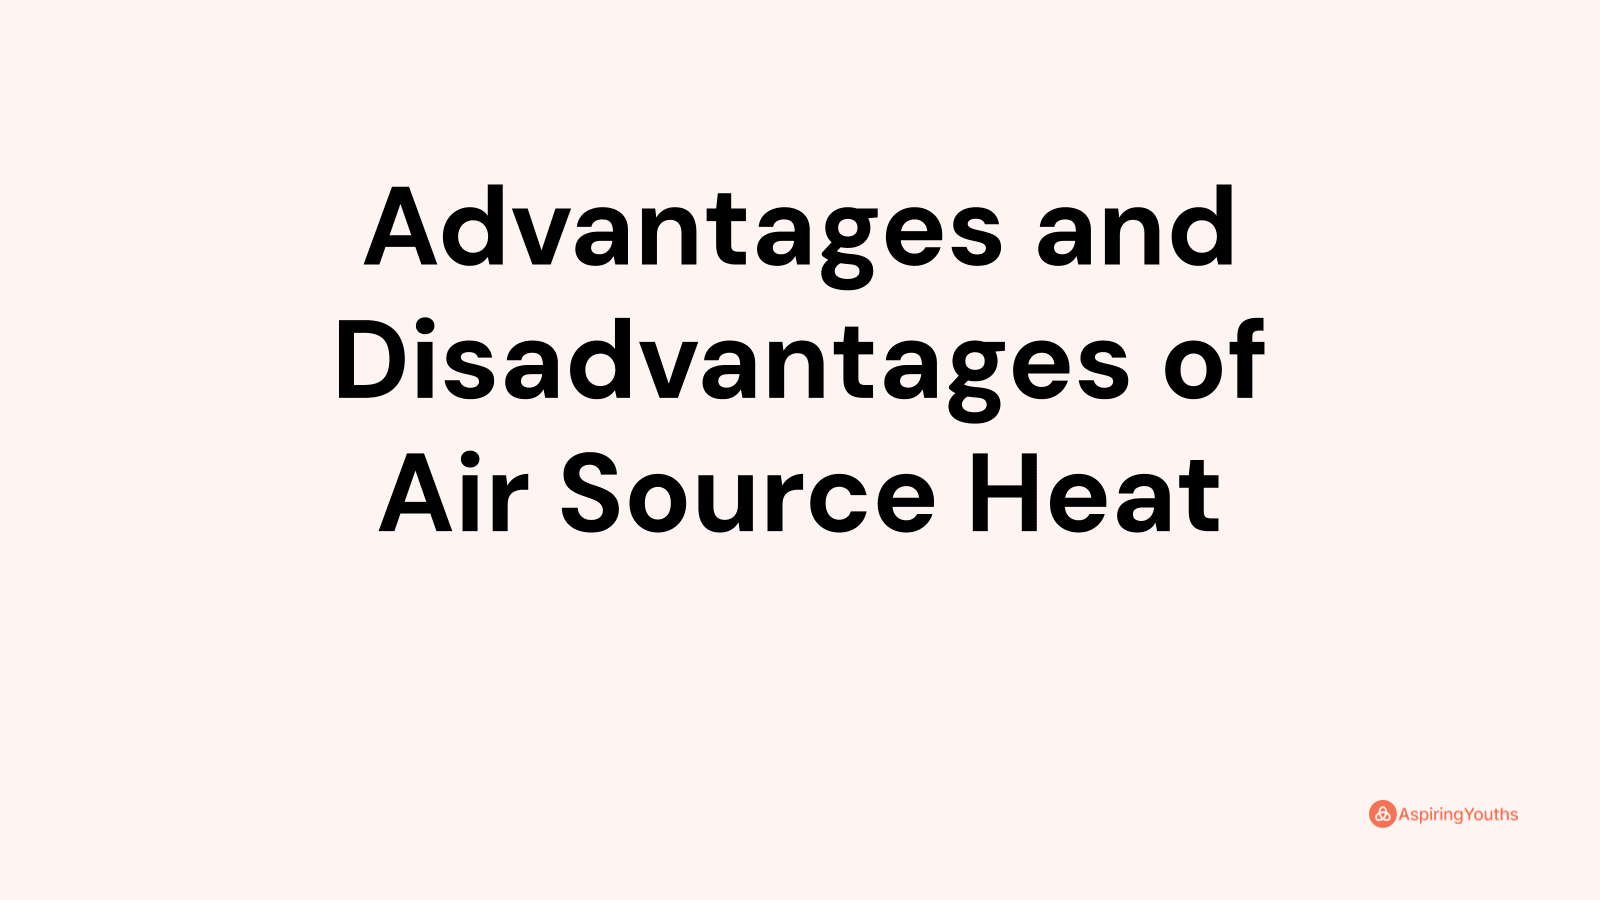 Advantages and disadvantages of Air Source Heat